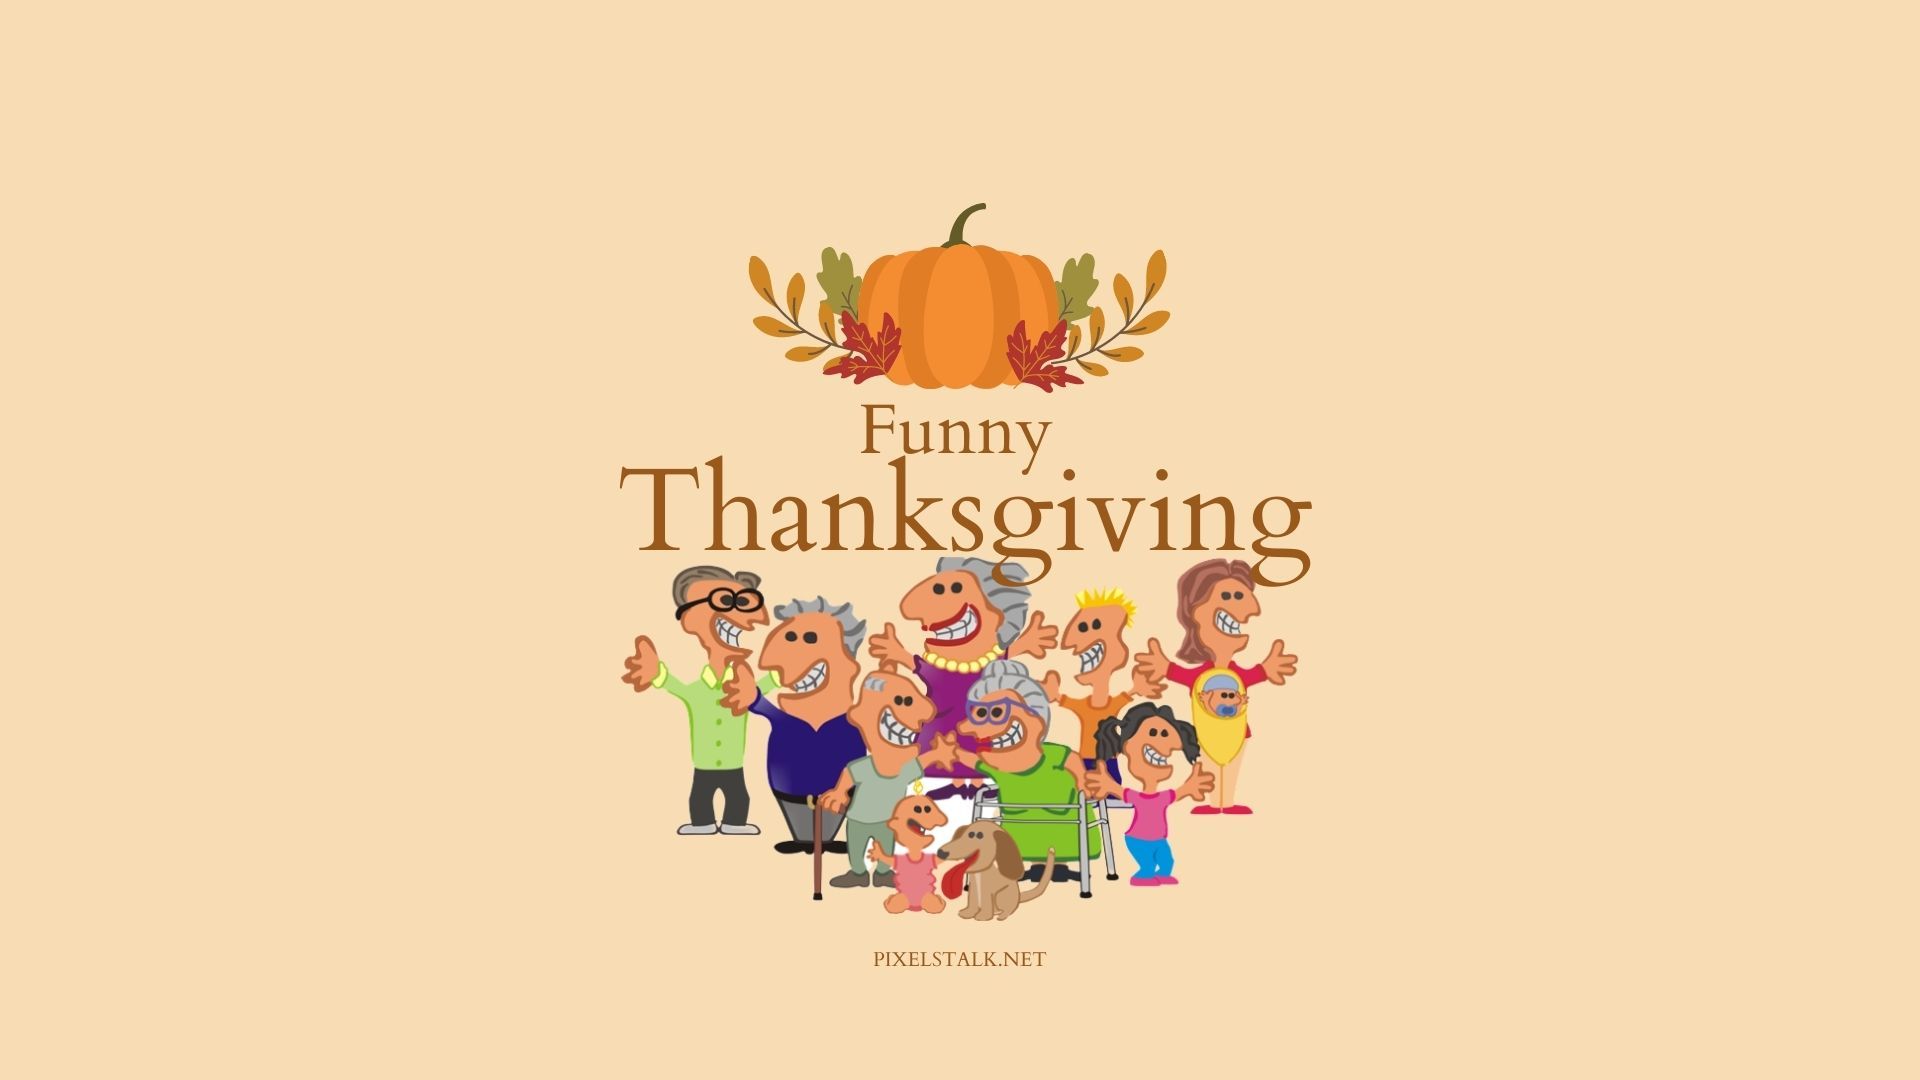 Funny Thanksgiving Wallpaper Free Download